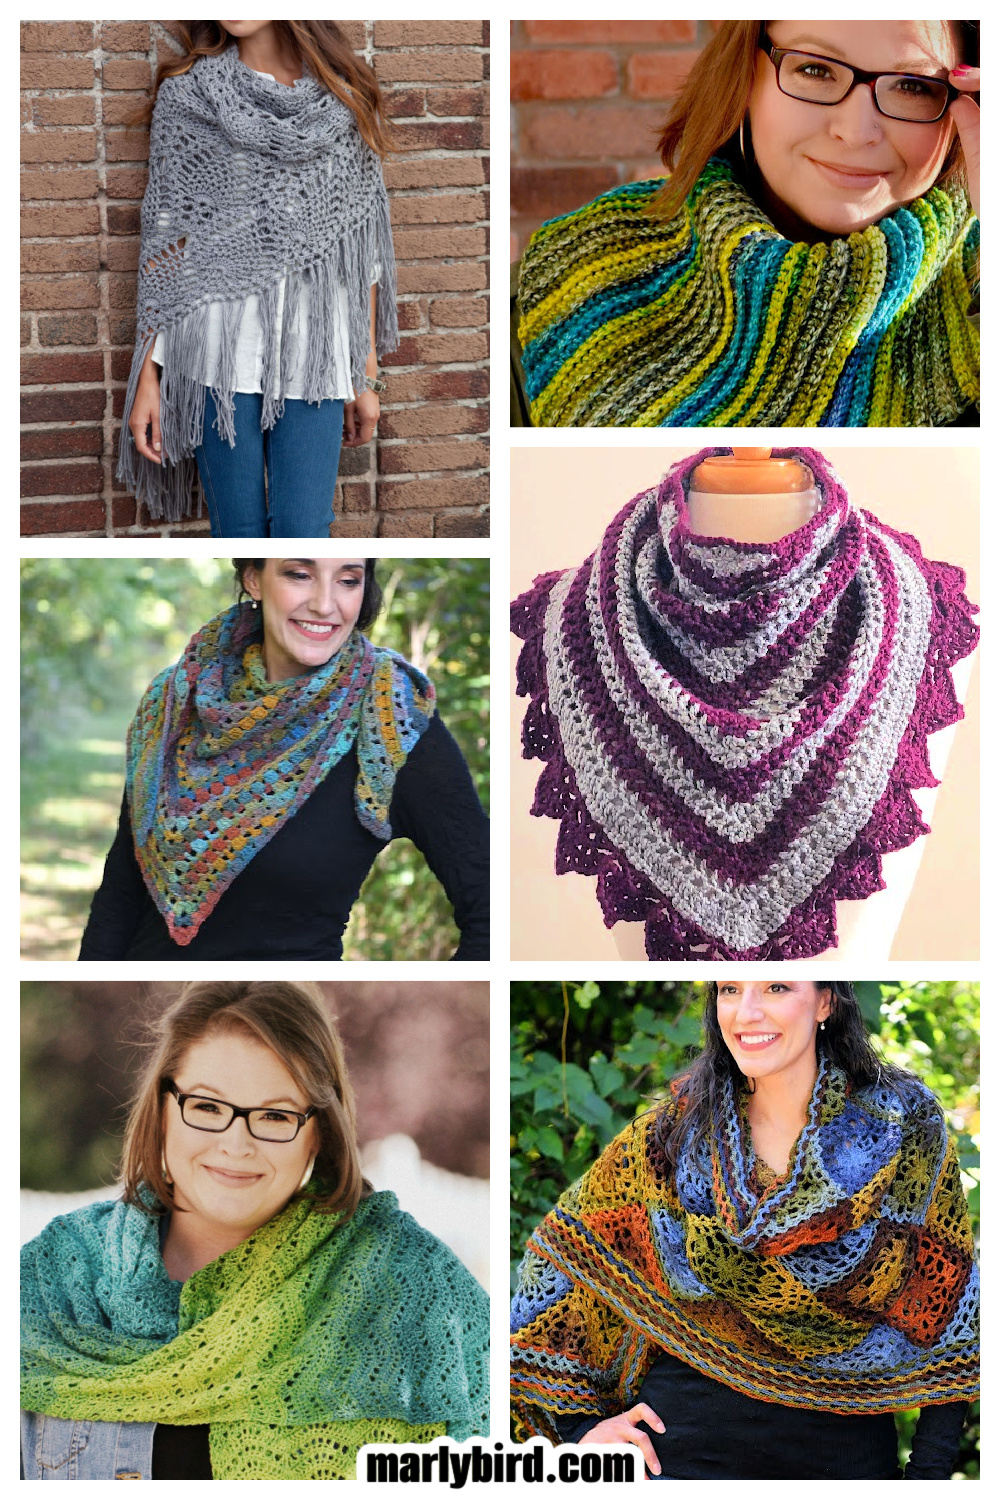 Free Crochet Prayer Shawl Patterns on the Marly Bird Website - more than 10 patterns to inspire and encourage - Marly Bird